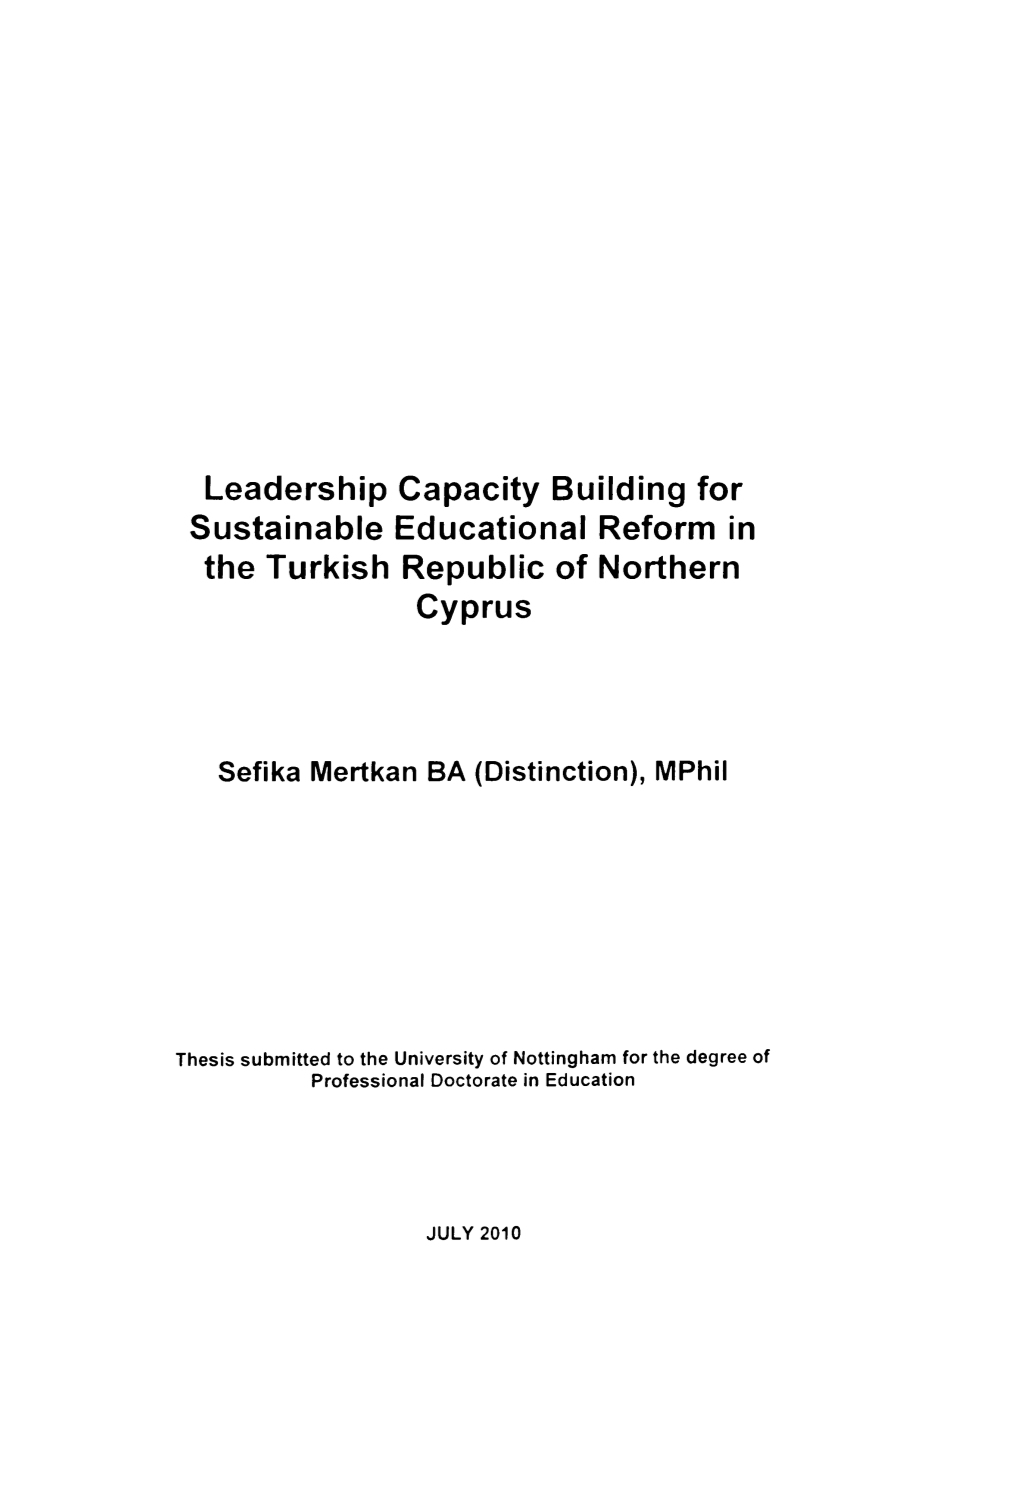 Educational Reform in the Turkish Republic of Northern Cyprus